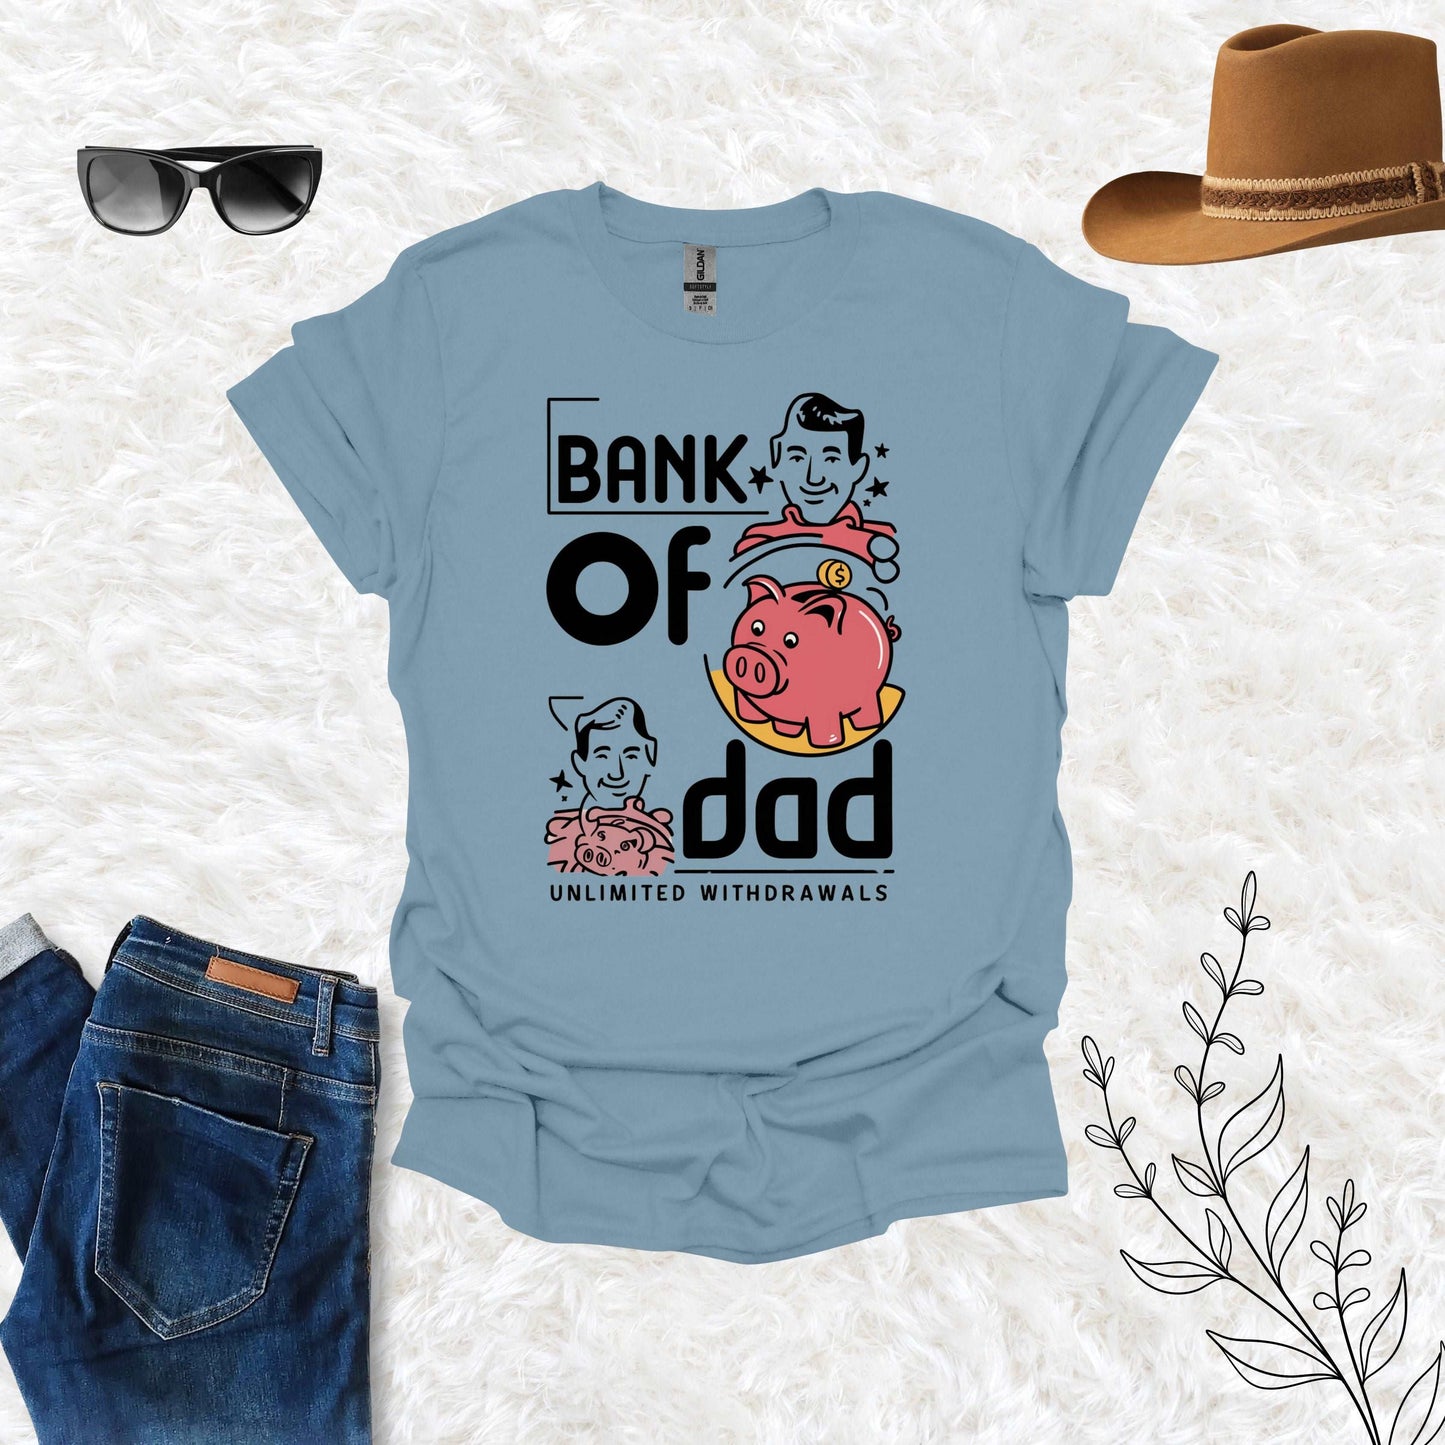 Bank of Dad Stone Blue Shirt - Unlimited Withdrawal from My Father